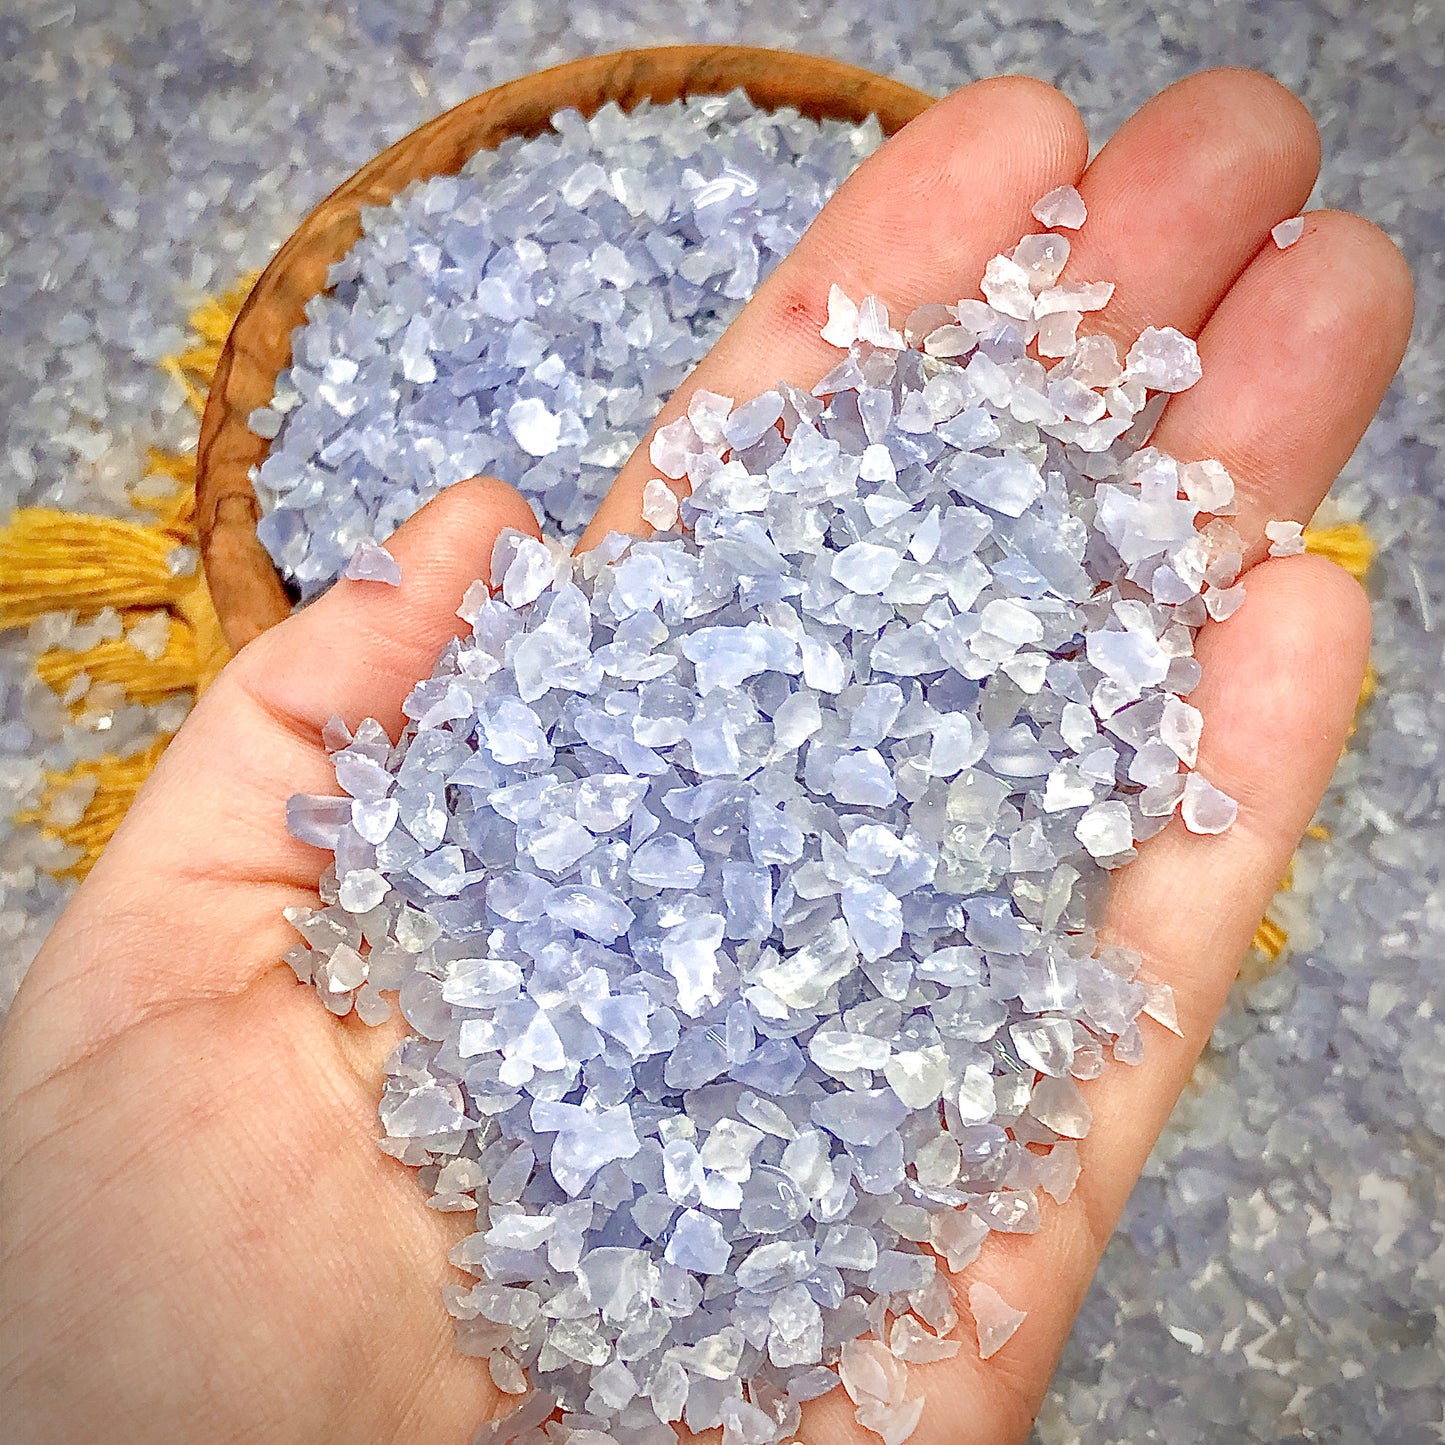 Crushed Blue Chalcedony (Grade A+) from Namibia, Coarse Crush, Gravel Size (4mm - 2mm) for Metaphysical Projects, Resin Art, Ring Inlay or Jewelry